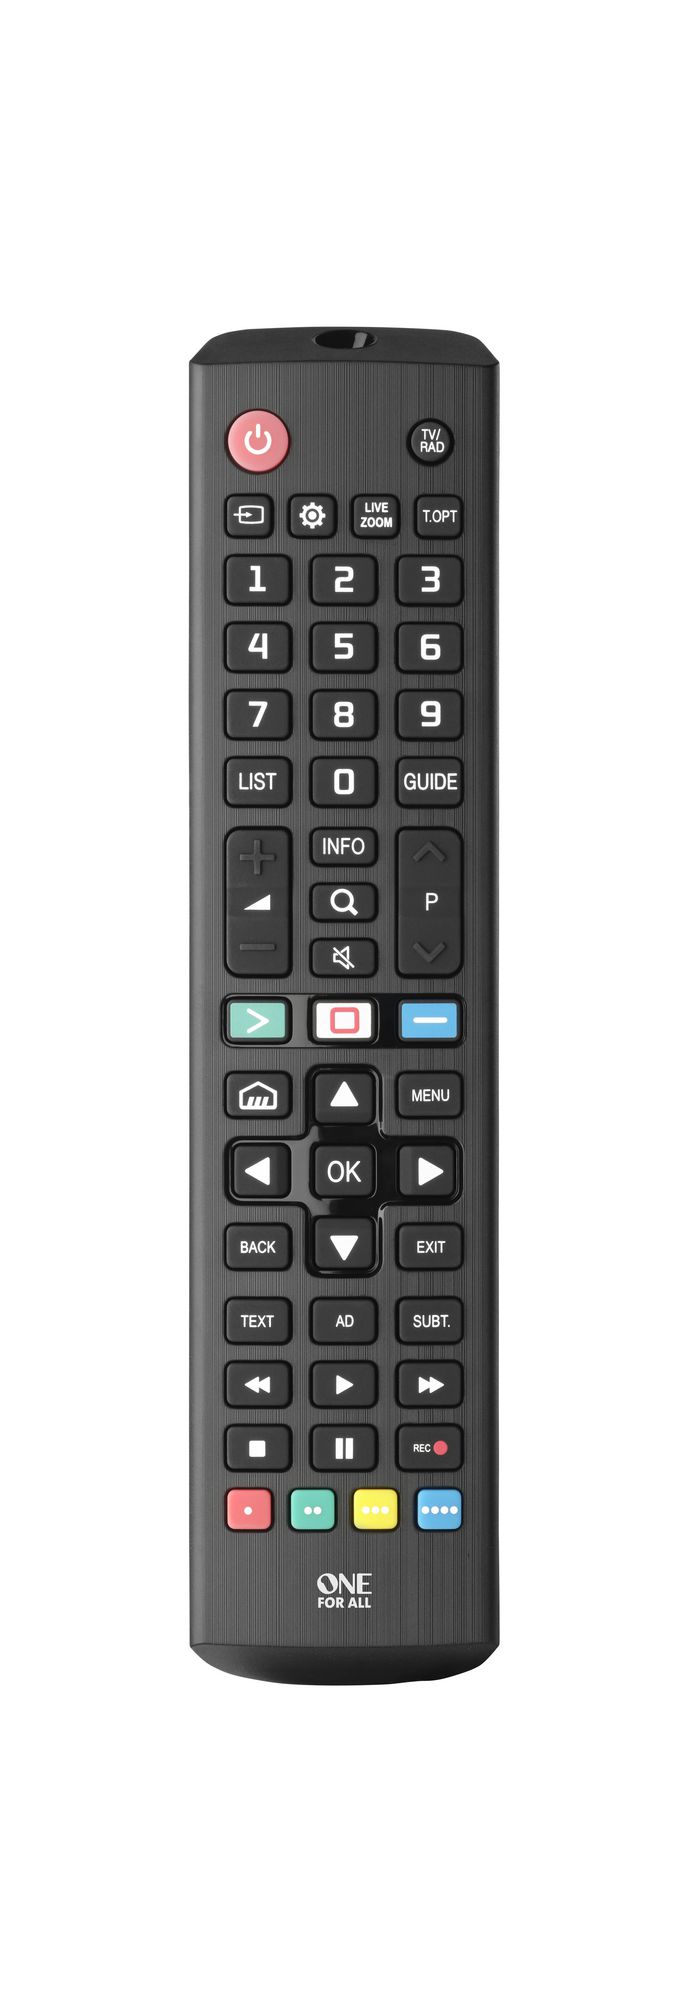 One For All LG TV Replacement Remote Control - W126401817